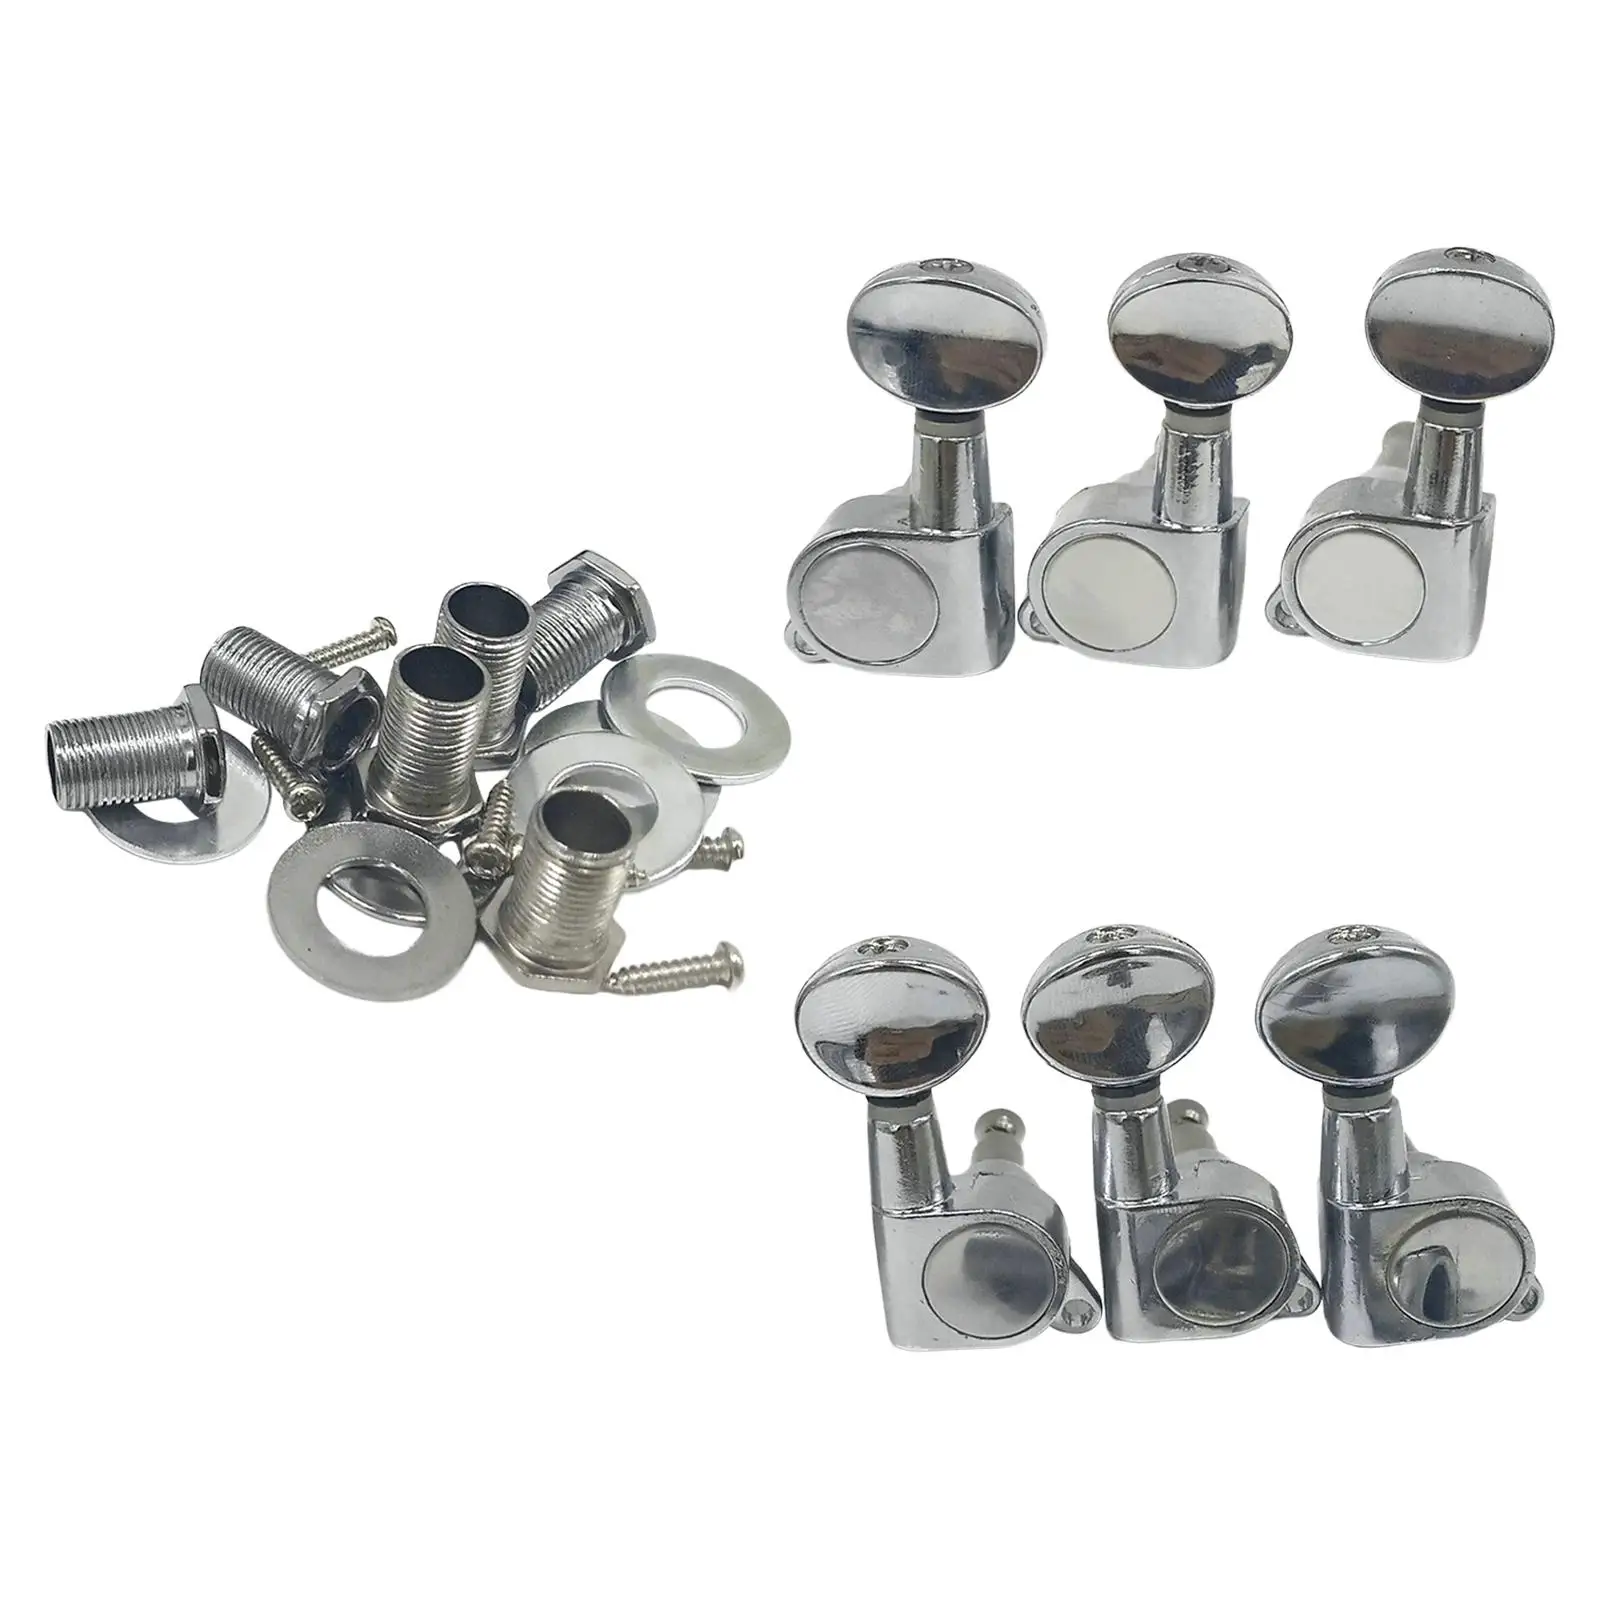 6x Zinc Alloy Guitar 3L 3R Sealed String Button Tuning Pegs Key Peg Knobs Tuners for Acoustic Electric Guitar Accessories